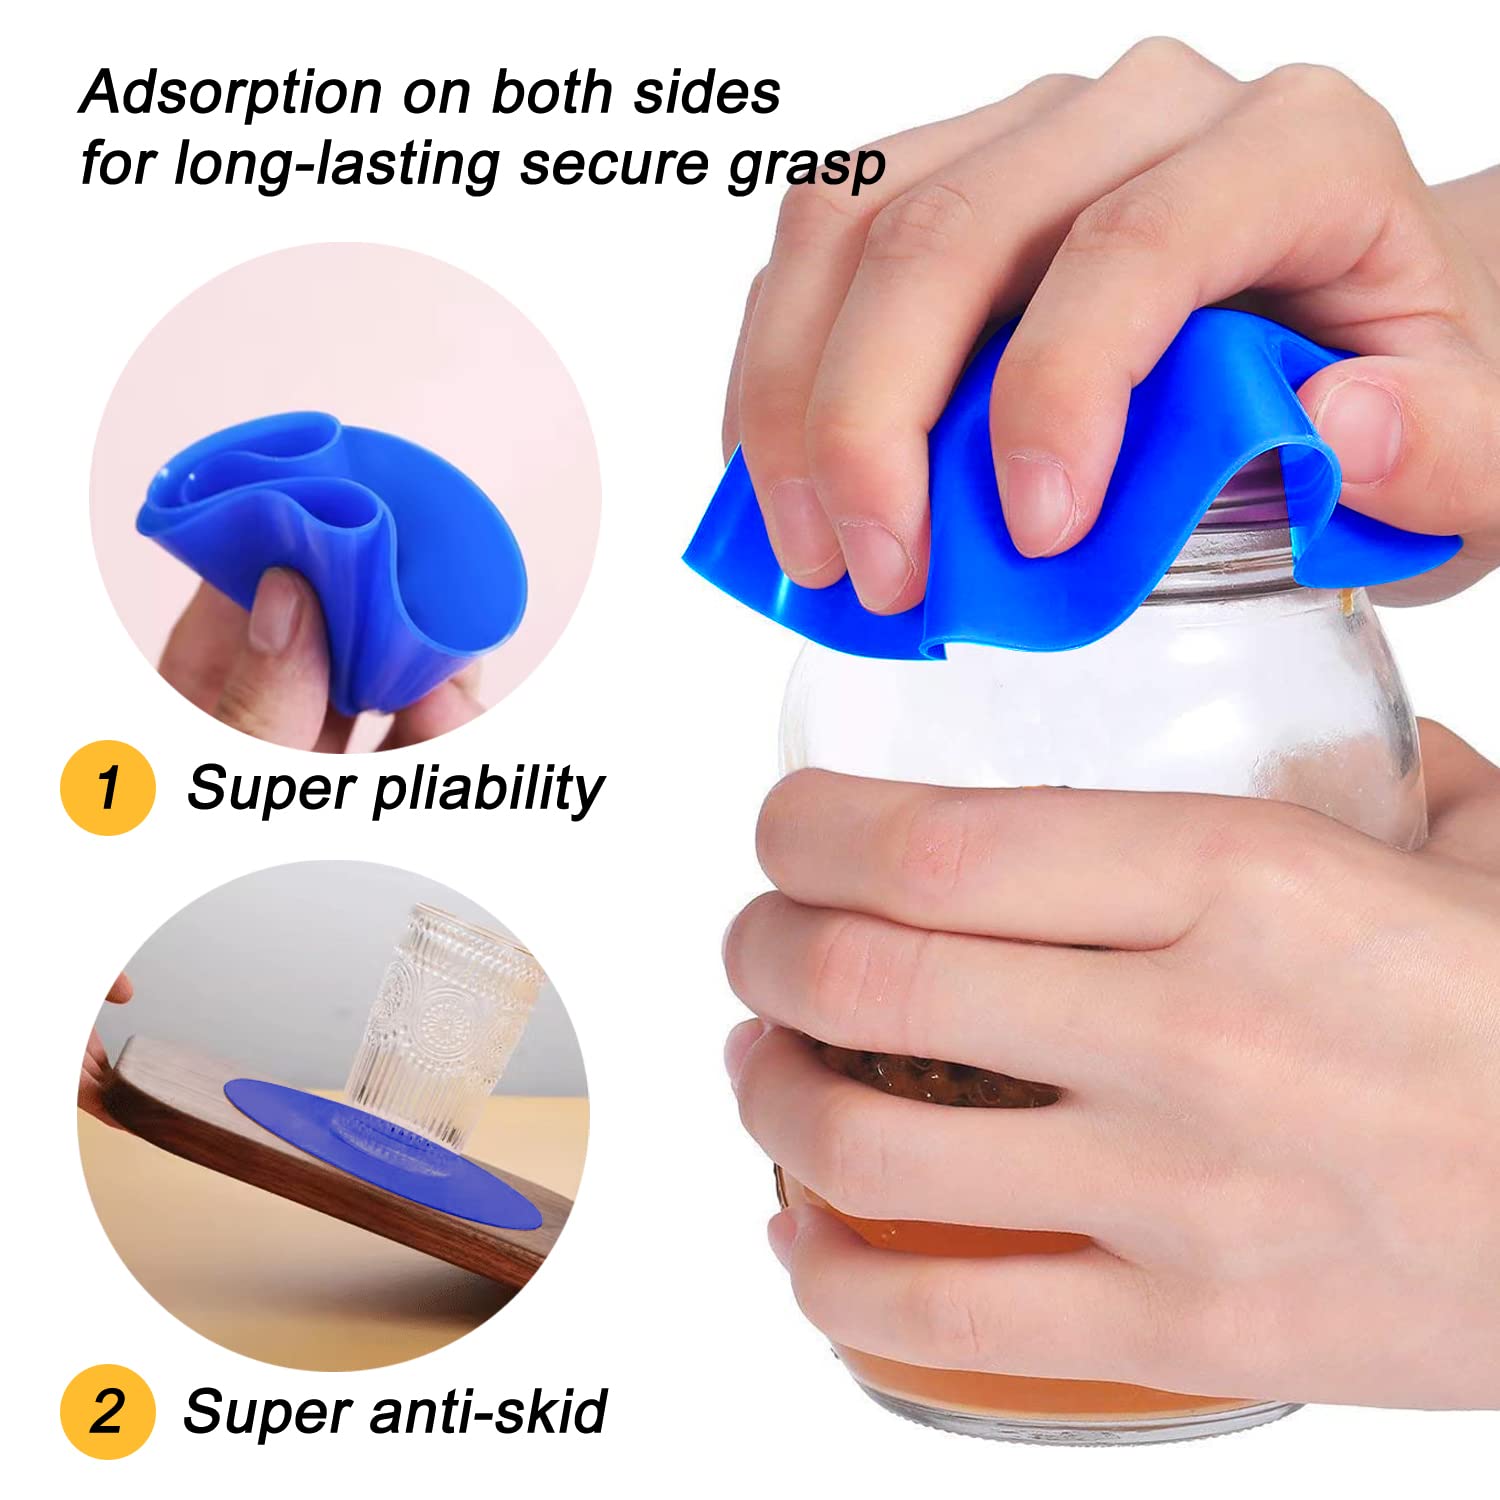 Multifunctional Jar Opener Lid Opener Grippers - Bottle Opener for Rotating Caps with Jar Opener Gripper Pad, Effortless to Unscrew Any-Size Lid, Great for Arthritis - Perfect for Seniors & Weak Hands